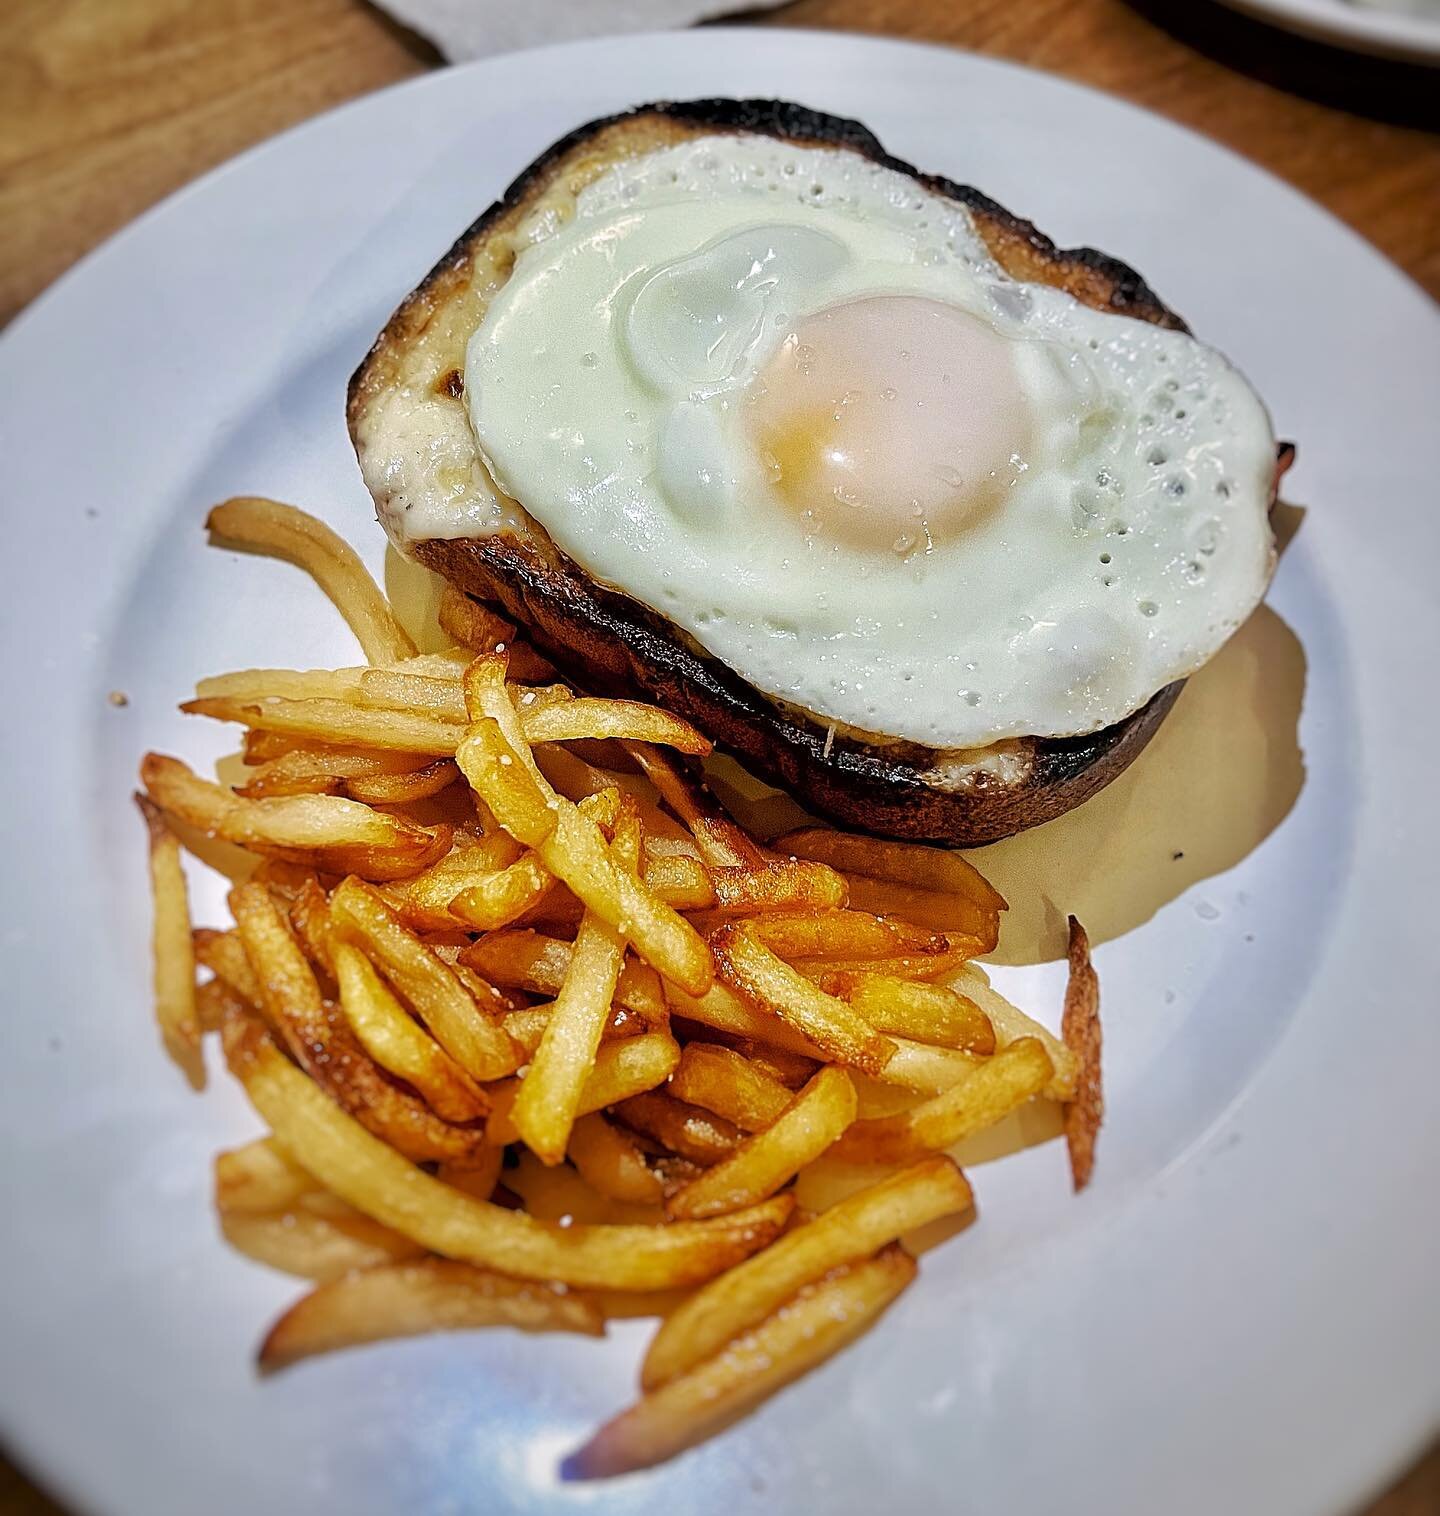 Today&rsquo;s experiment in the kitchen: 
Croque Monsieur avec pommes frittes 🍳🇫🇷 D&Eacute;-LI-CIEUX 👌

Early bday celebration de mi @natalia.mrey 🥳 Got rained out so decided to bring the restaurant to her ☺️ 

Croque Monsieur hack: Used an alfr